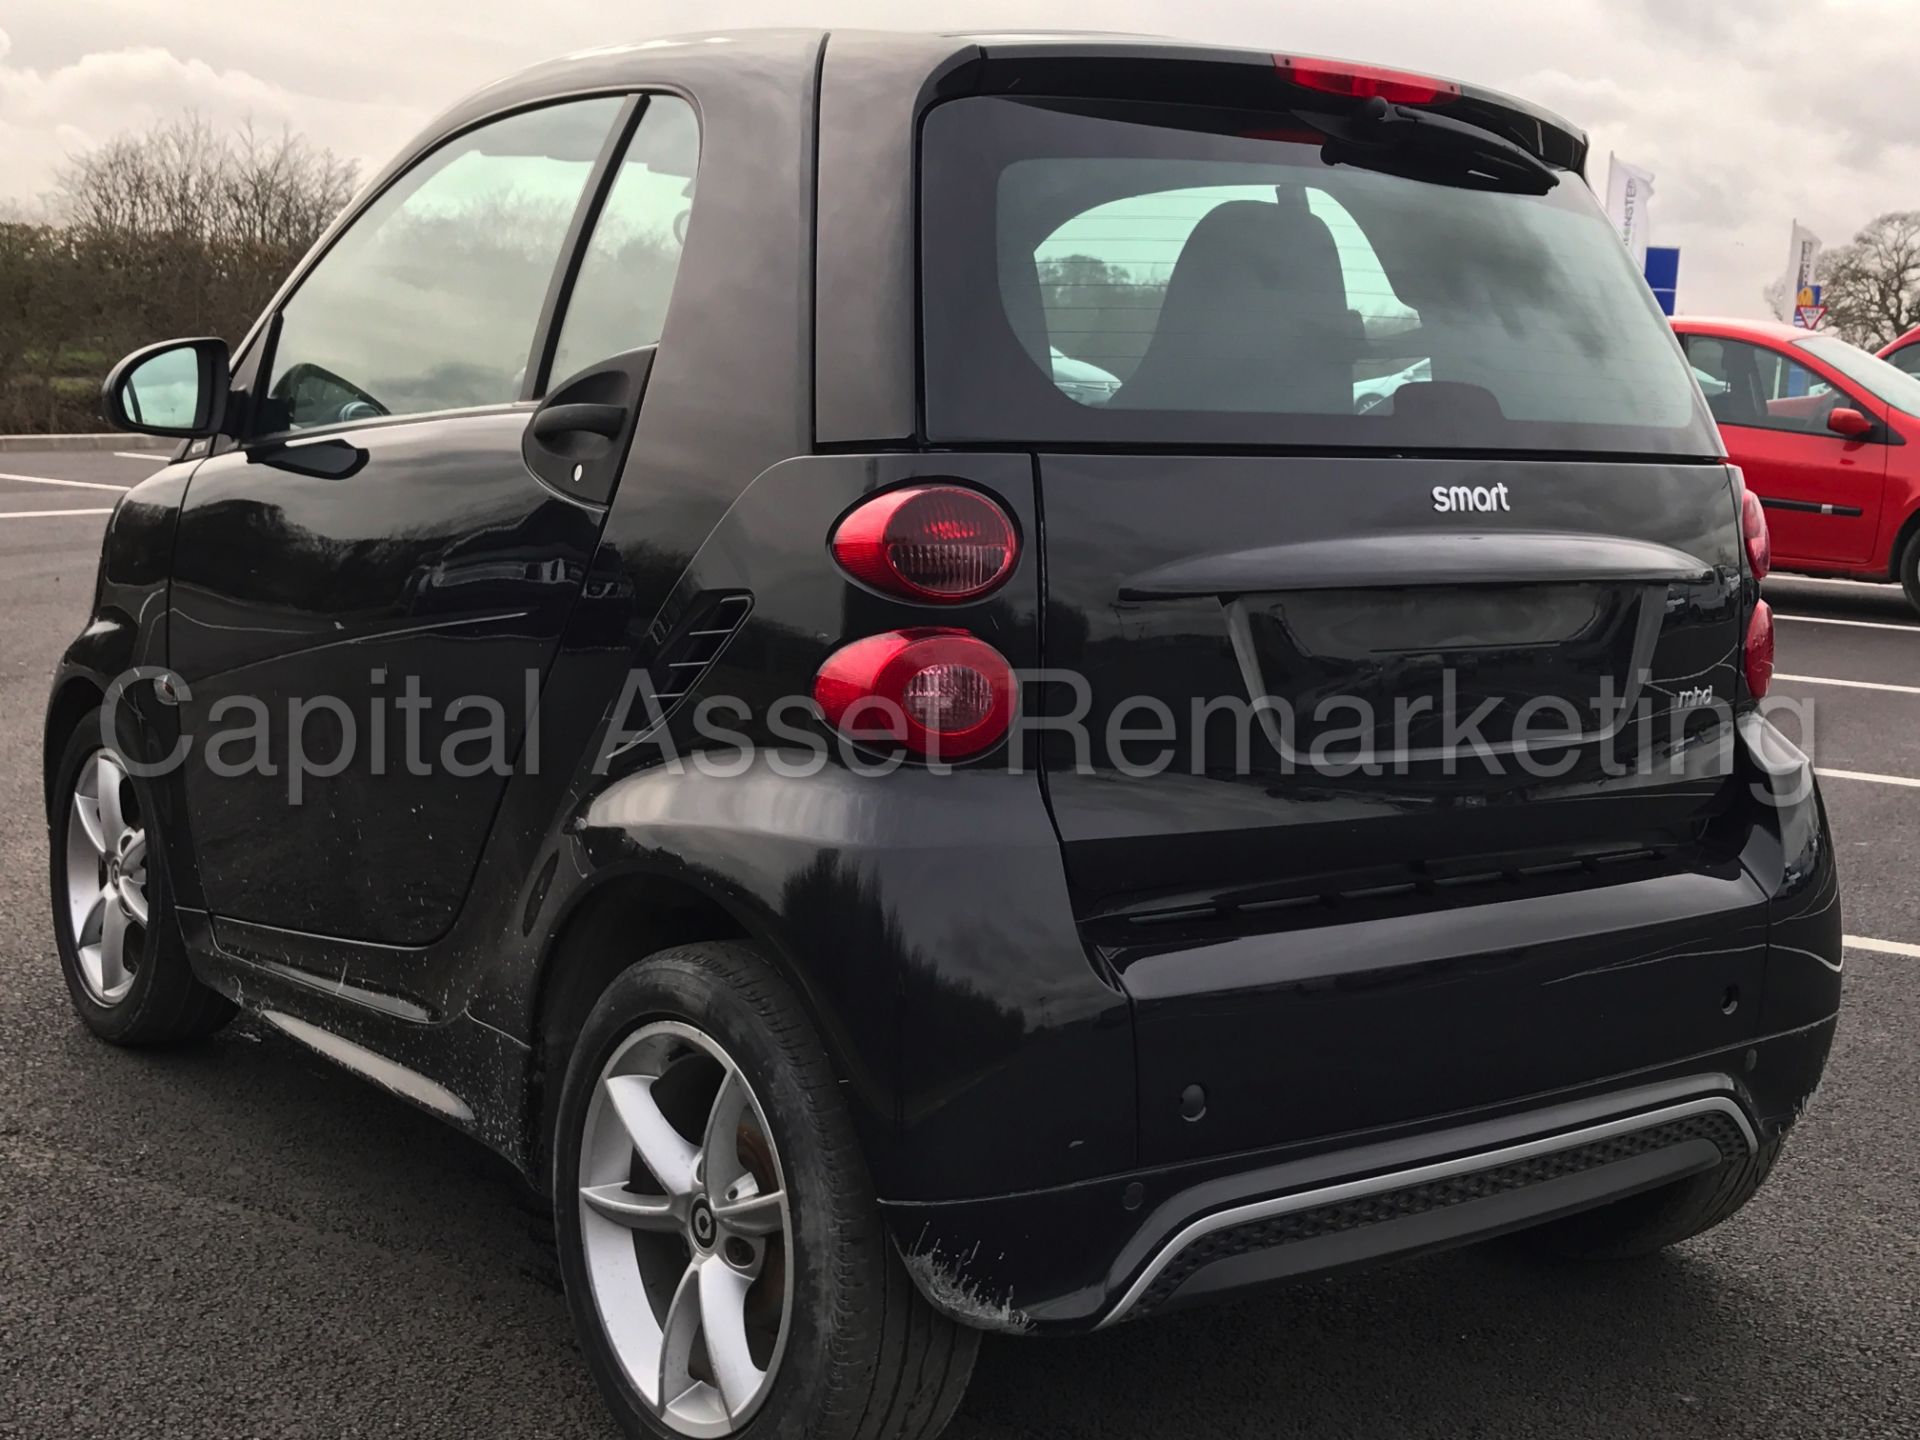 (On Sale) SMART FORTWO 'PULSE' (2013 MODEL) 'MHD - AUTO - A/C - 1 OWNER - STOP / START' (70 MPG +) - Image 3 of 21